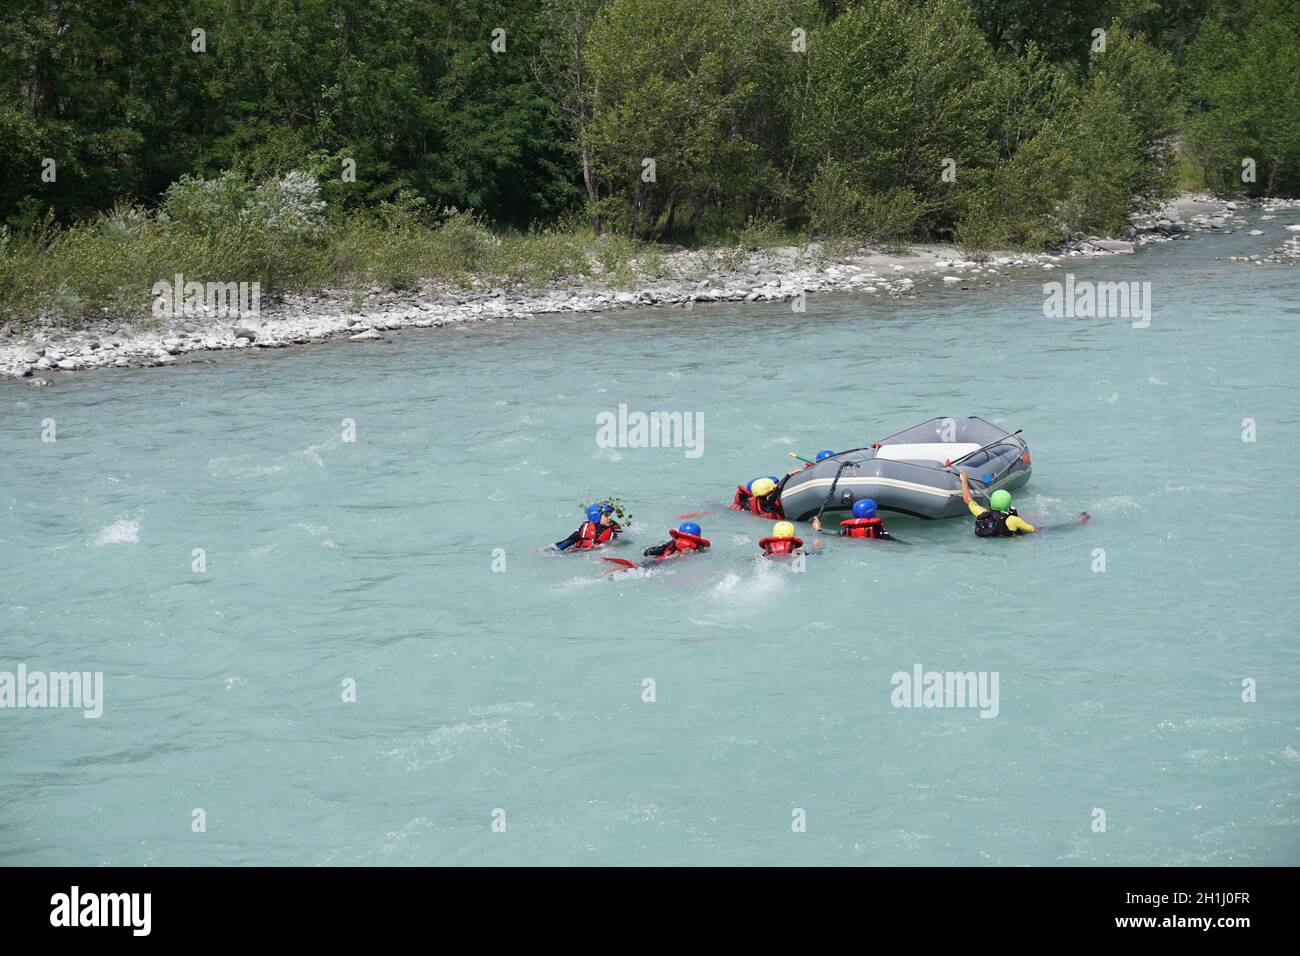 overboard people on durance river alps france white river rafting Stock Photo